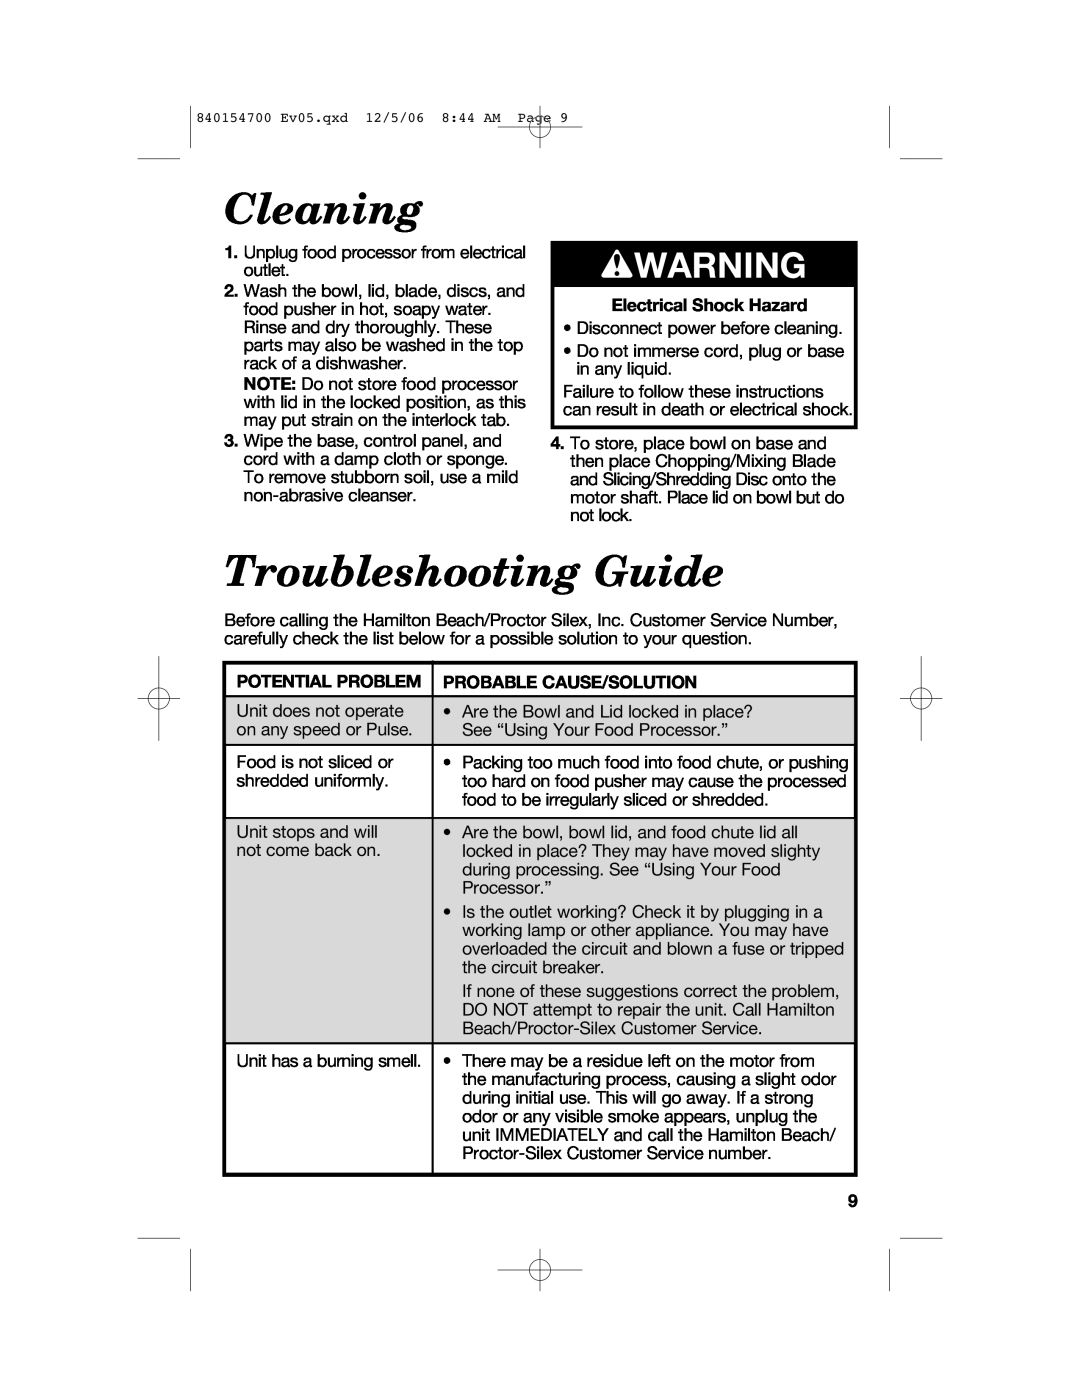 Hamilton Beach 70610C manual Cleaning, Troubleshooting Guide, wWARNING, Electrical Shock Hazard, Potential Problem 